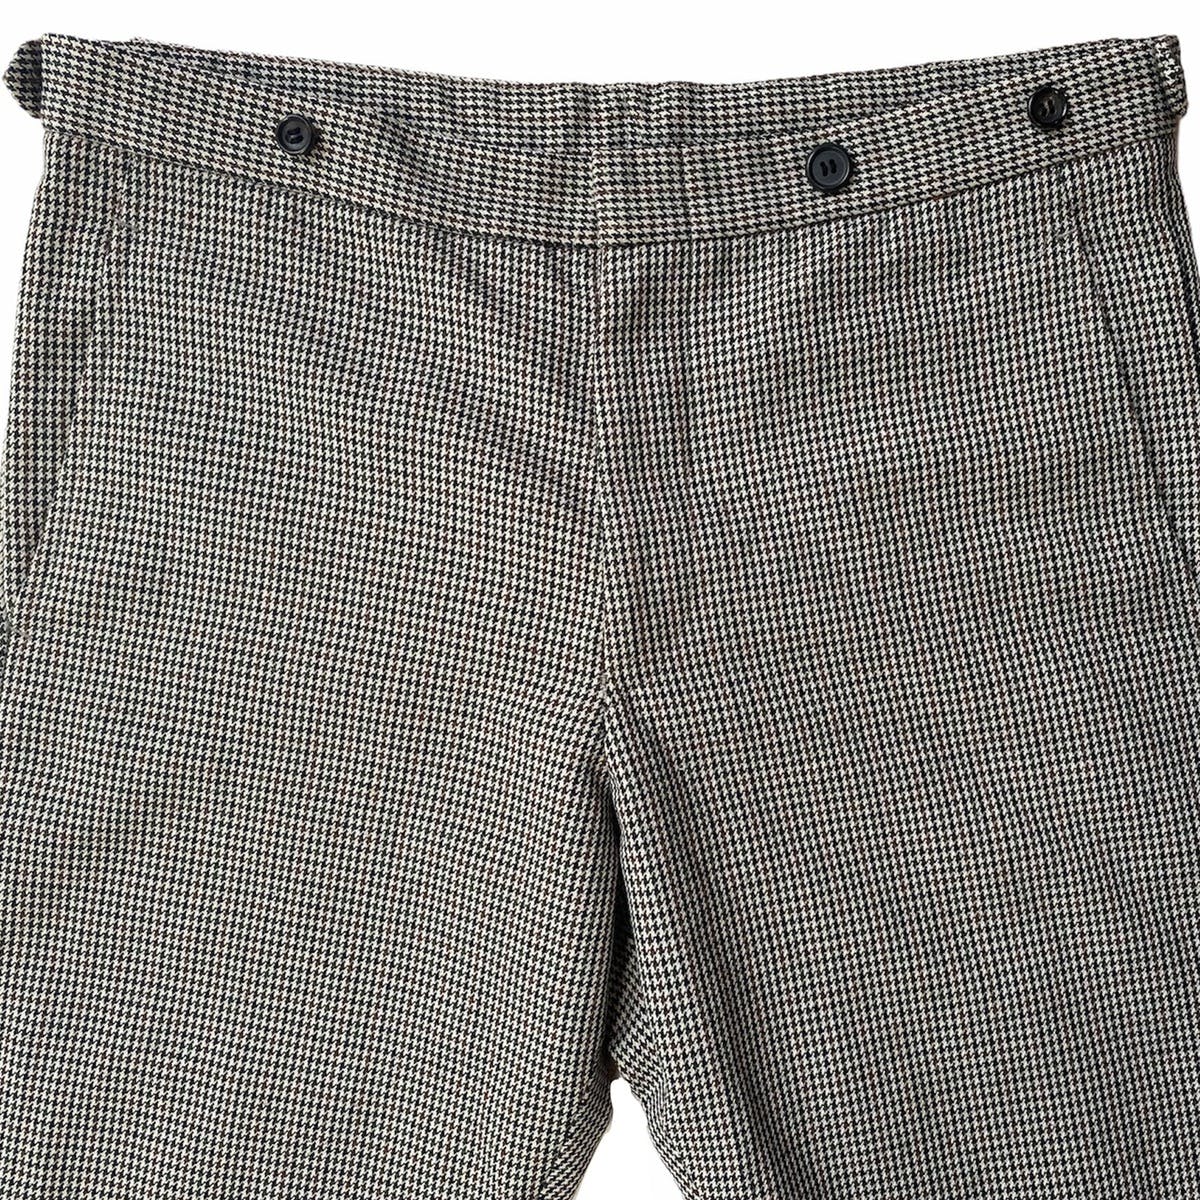 Vintage Fall96 Houndstooth Pants - 1